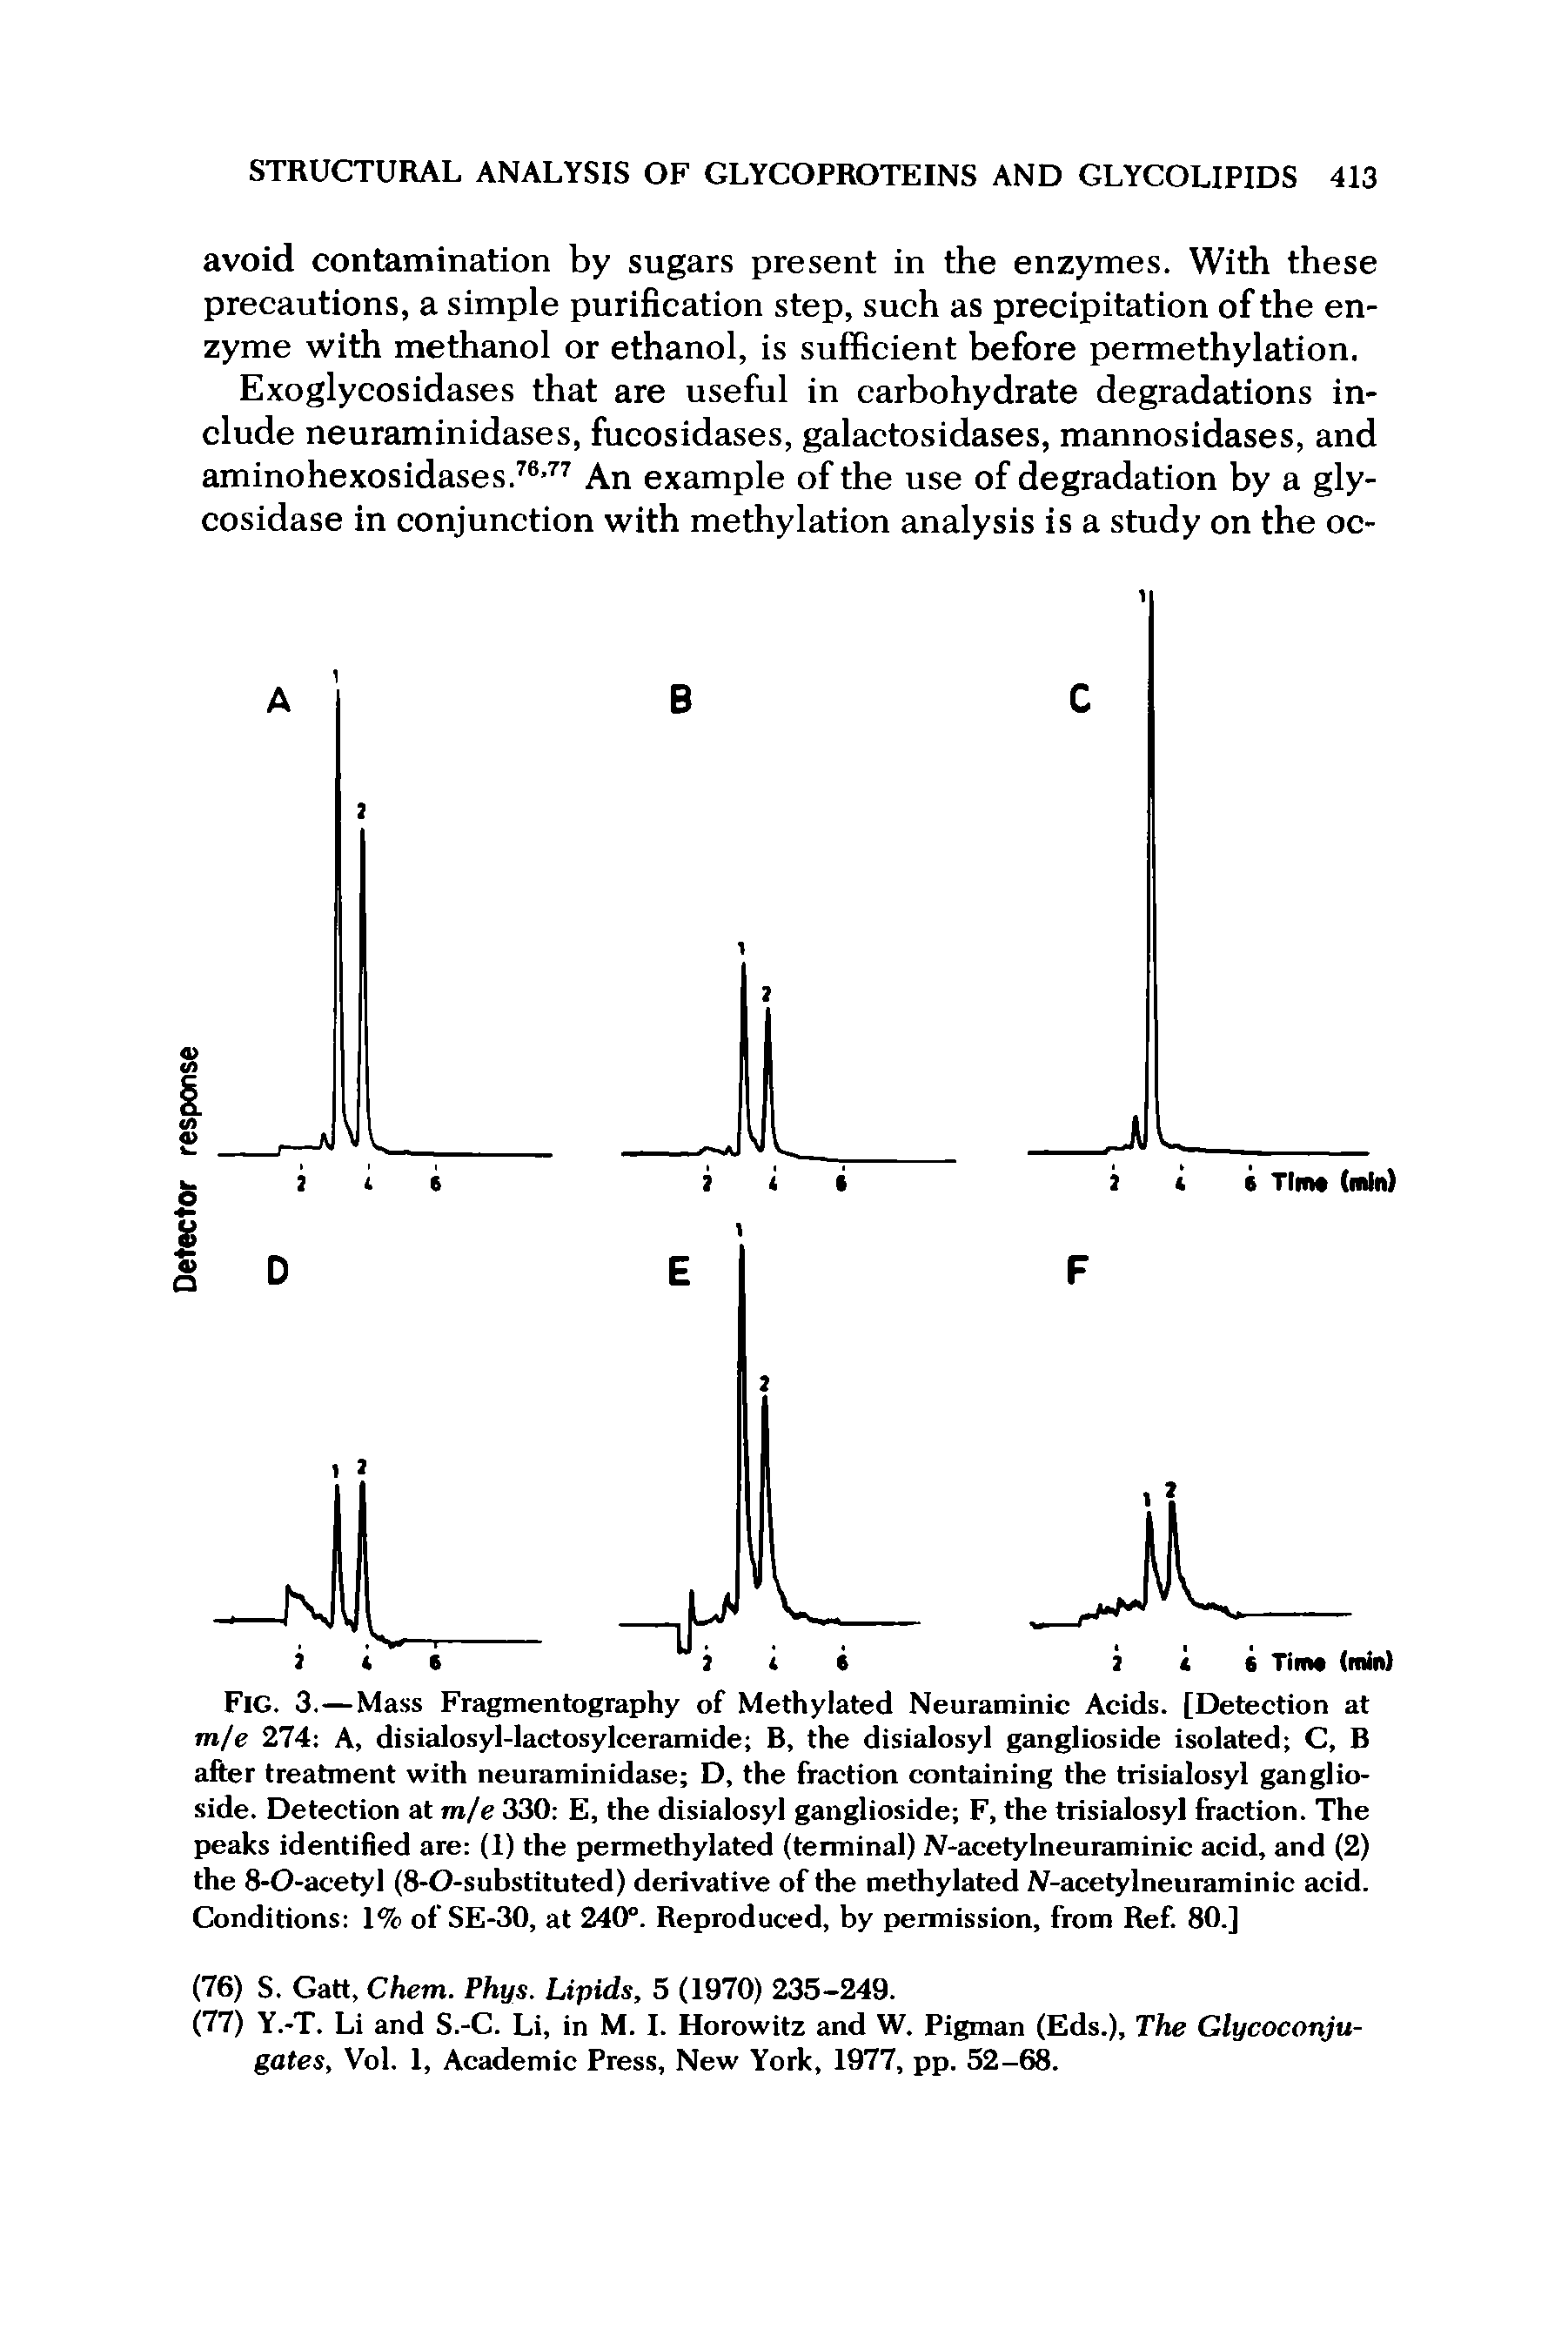 Fig. 3.—Mass Fragmentography of Methylated Neuraminic Acids. [Detection at m/e 274 A, disialosyl-lactosylceramide B, the disialosyl ganglioside isolated C, B after treatment with neuraminidase D, the fraction containing the trisialosyl ganglioside. Detection at m/e 330 E, the disialosyl ganglioside F, the trisialosyl fraction. The peaks identified are (1) the permethylated (terminal) N-acetylneuraminic acid, and (2) the 8-O-acetyl (8-O-substituted) derivative of the methylated N-acetylneuraminic acid. Conditions 1% of SE-30, at 240°. Reproduced, by permission, from Ref. 80.]...